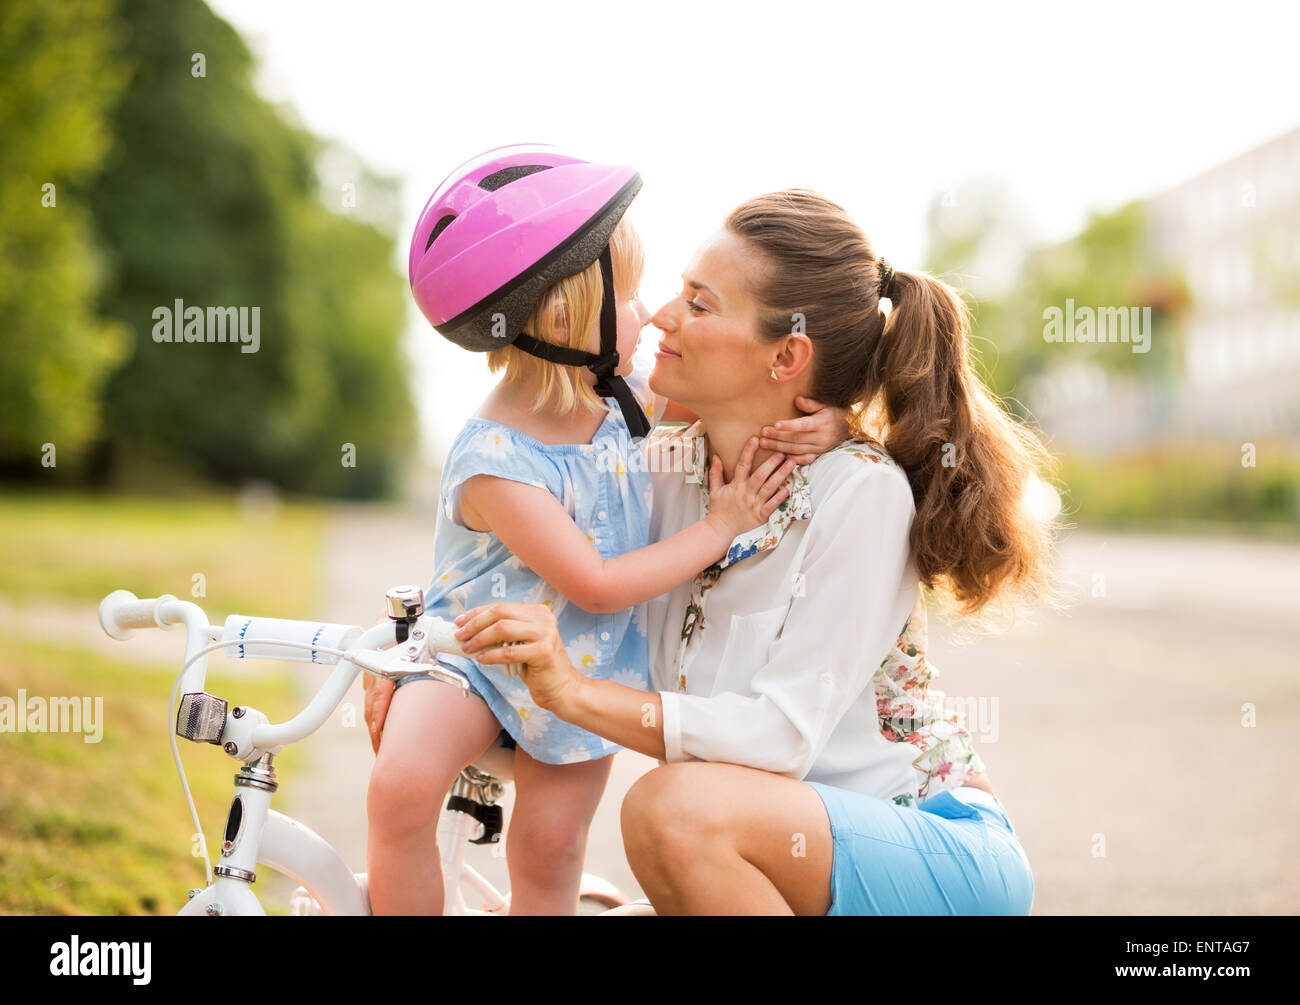 Eskimo kisses between a proud mother and daughter, who has just learned how to ride her bicycle. The mother kneels lovingly next Stock Photo